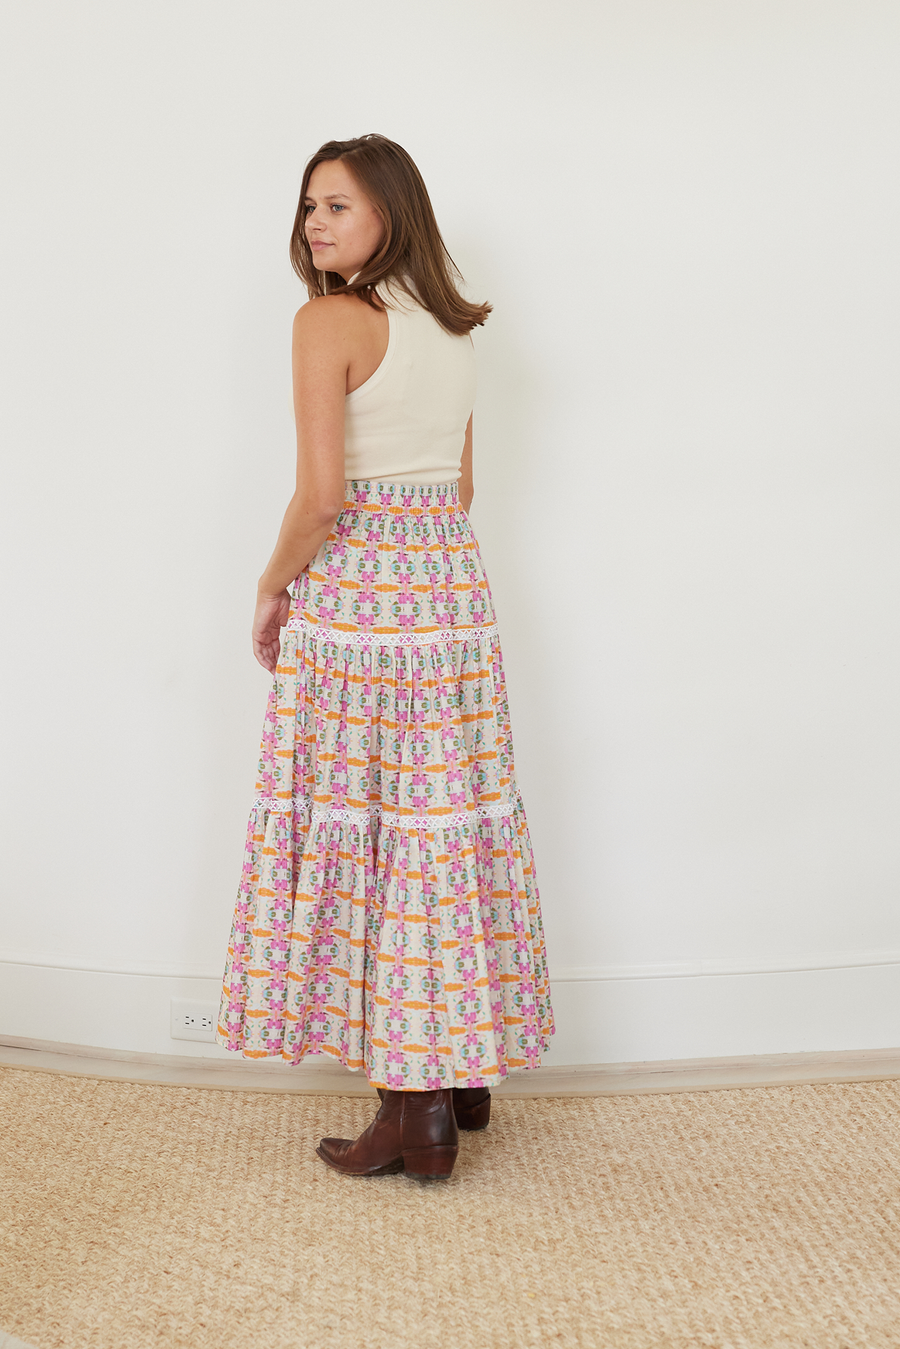 Triple Tiered Maxi Skirt in Begonia by Brooks Avenue